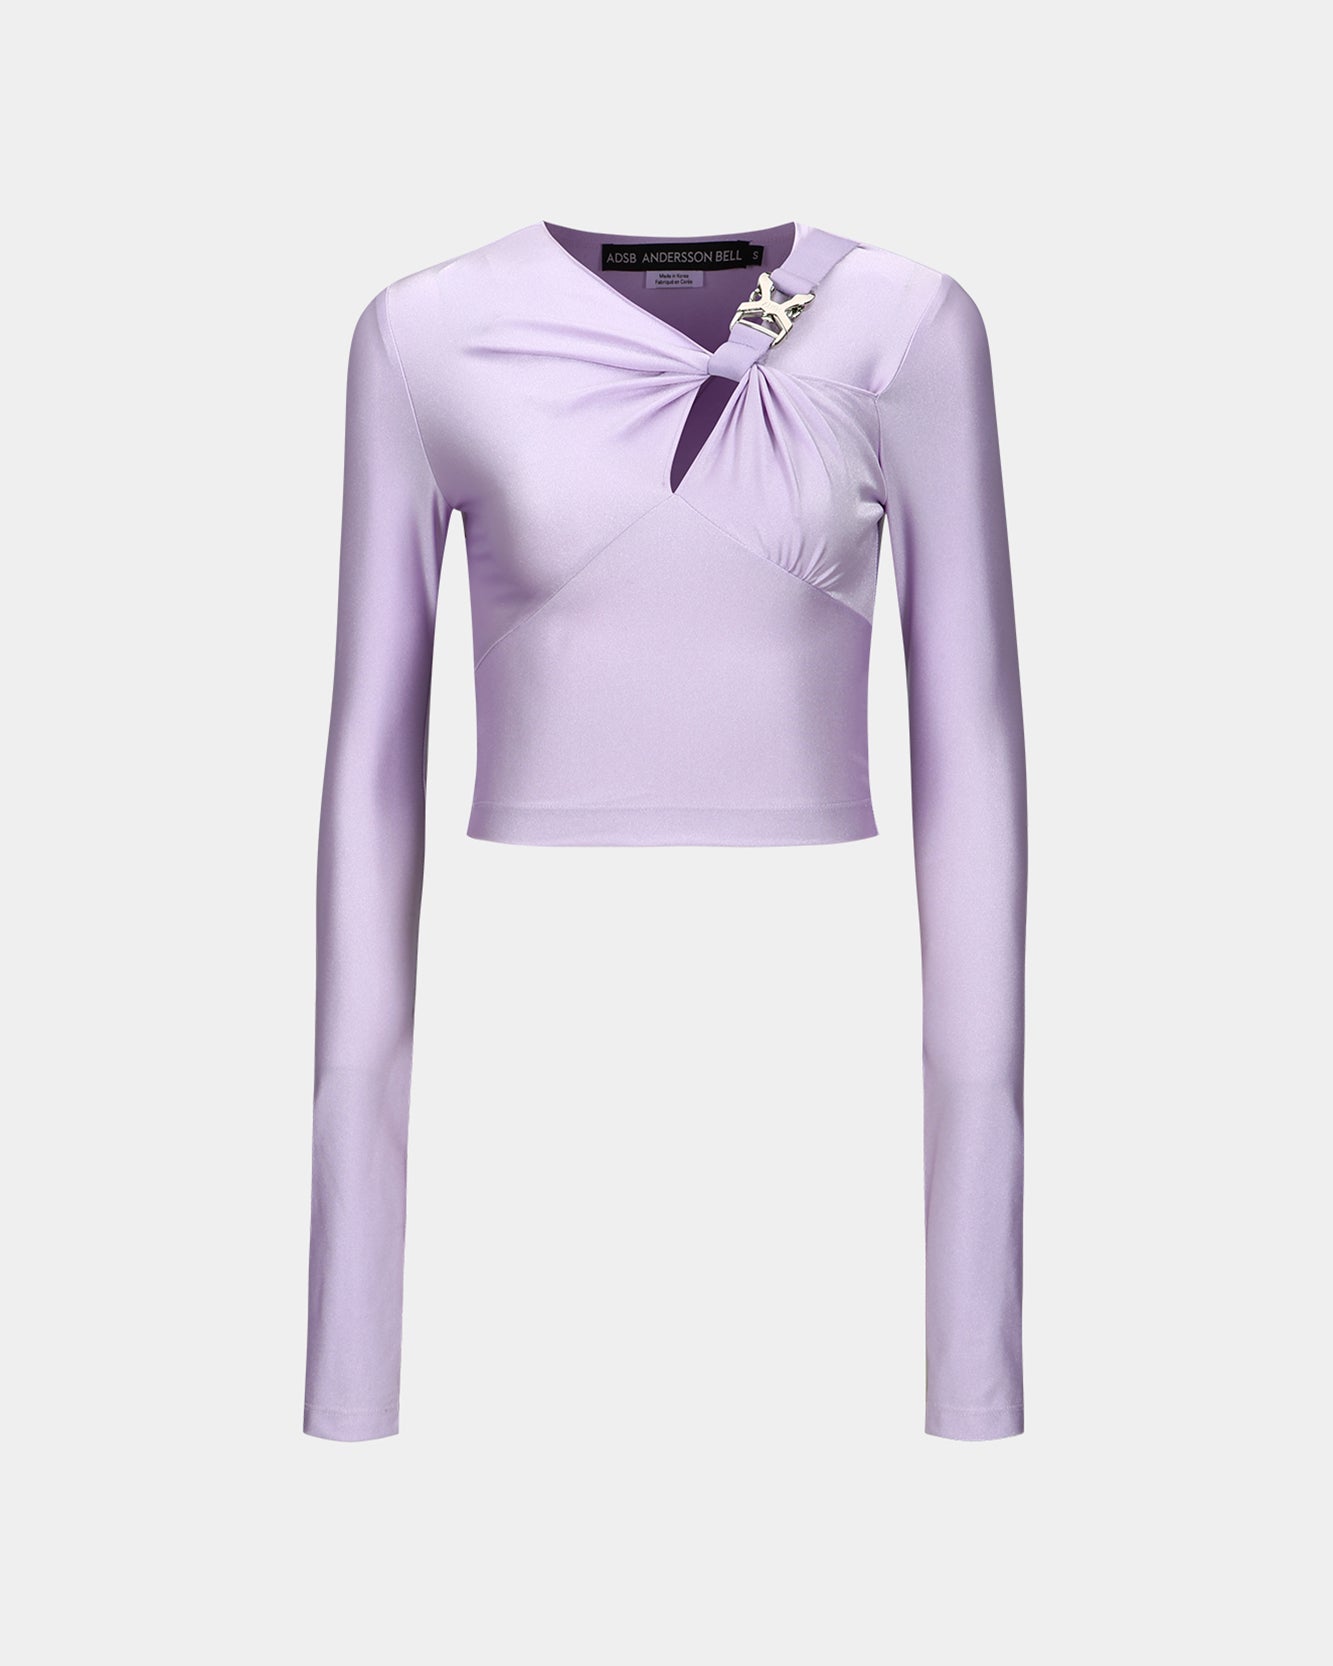 Andersson Bell (WOMEN) ELENA GLITTER SHIRRING TOP atb1095w(LILAC)